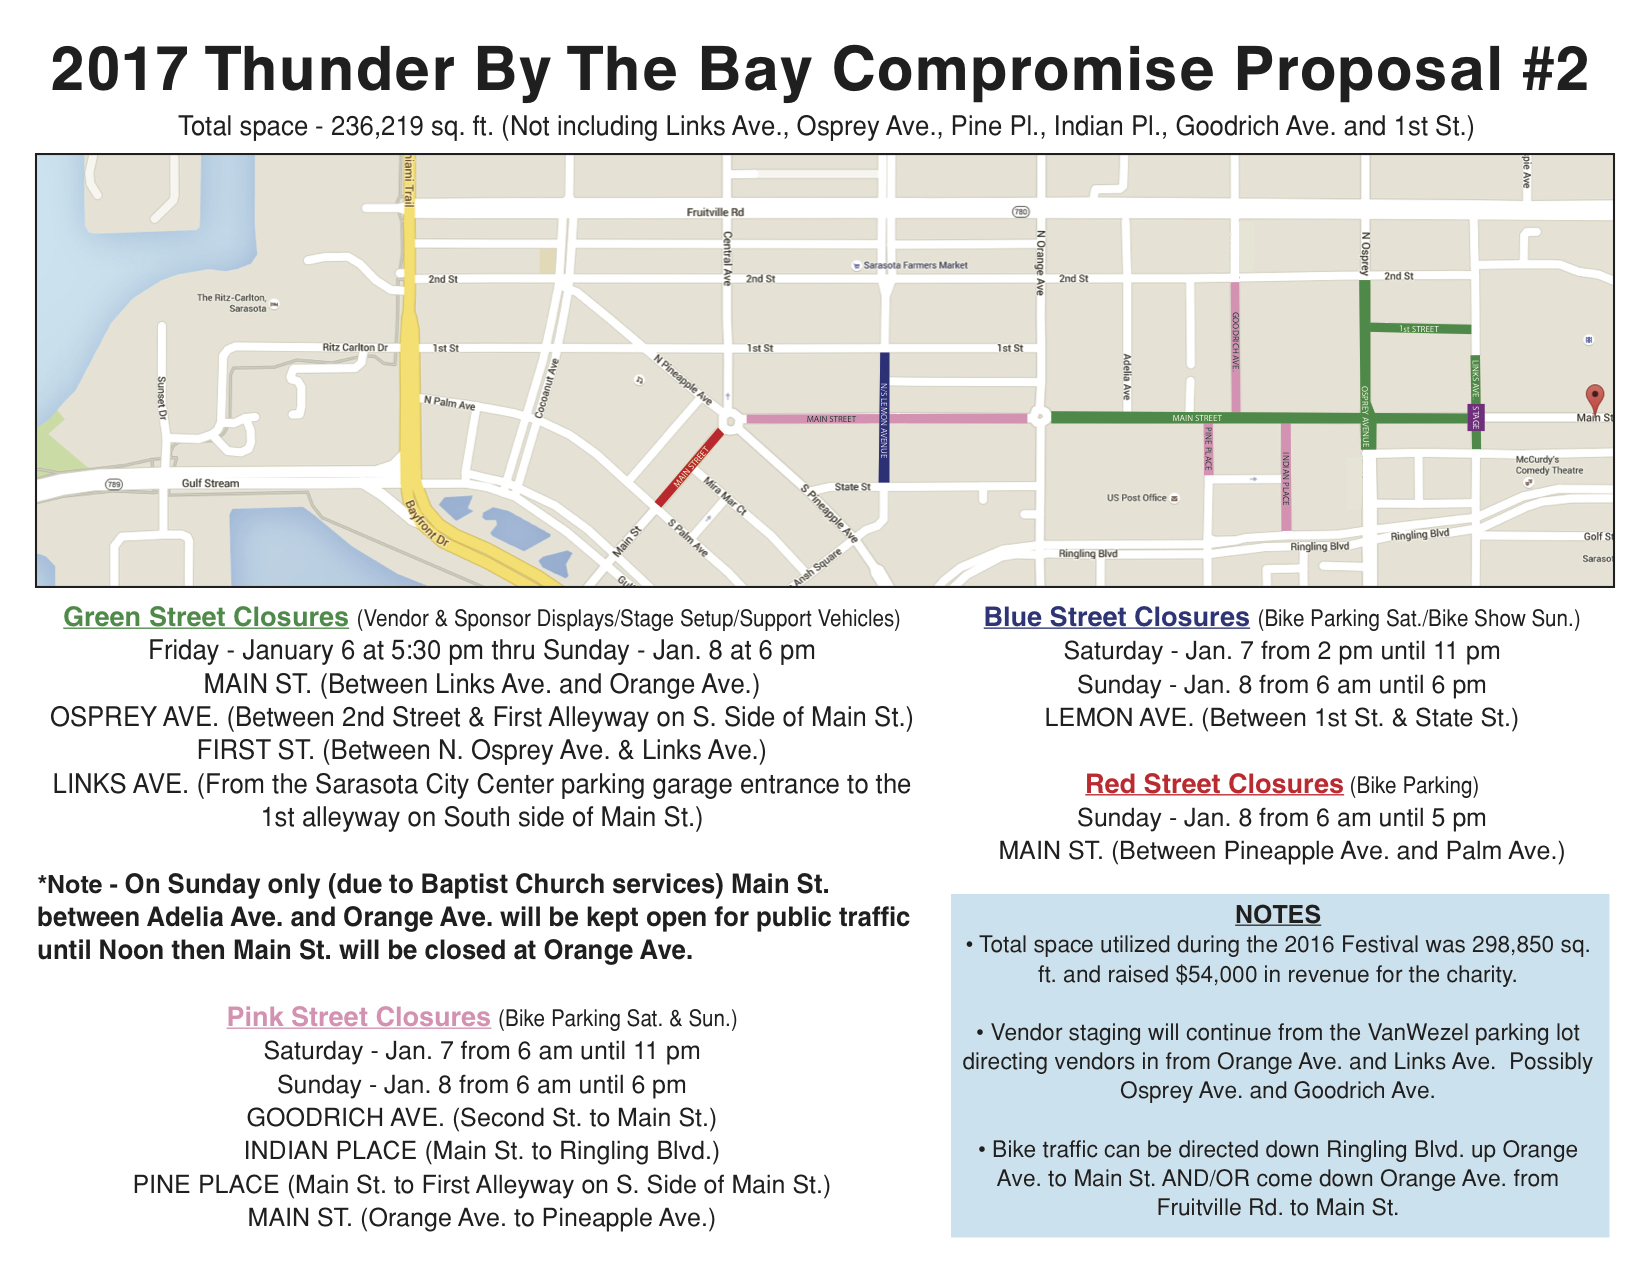 Thunder by the Bay organizer Lucy Nicandri submitted this map outlining a new configuration for the motorcycle festival.